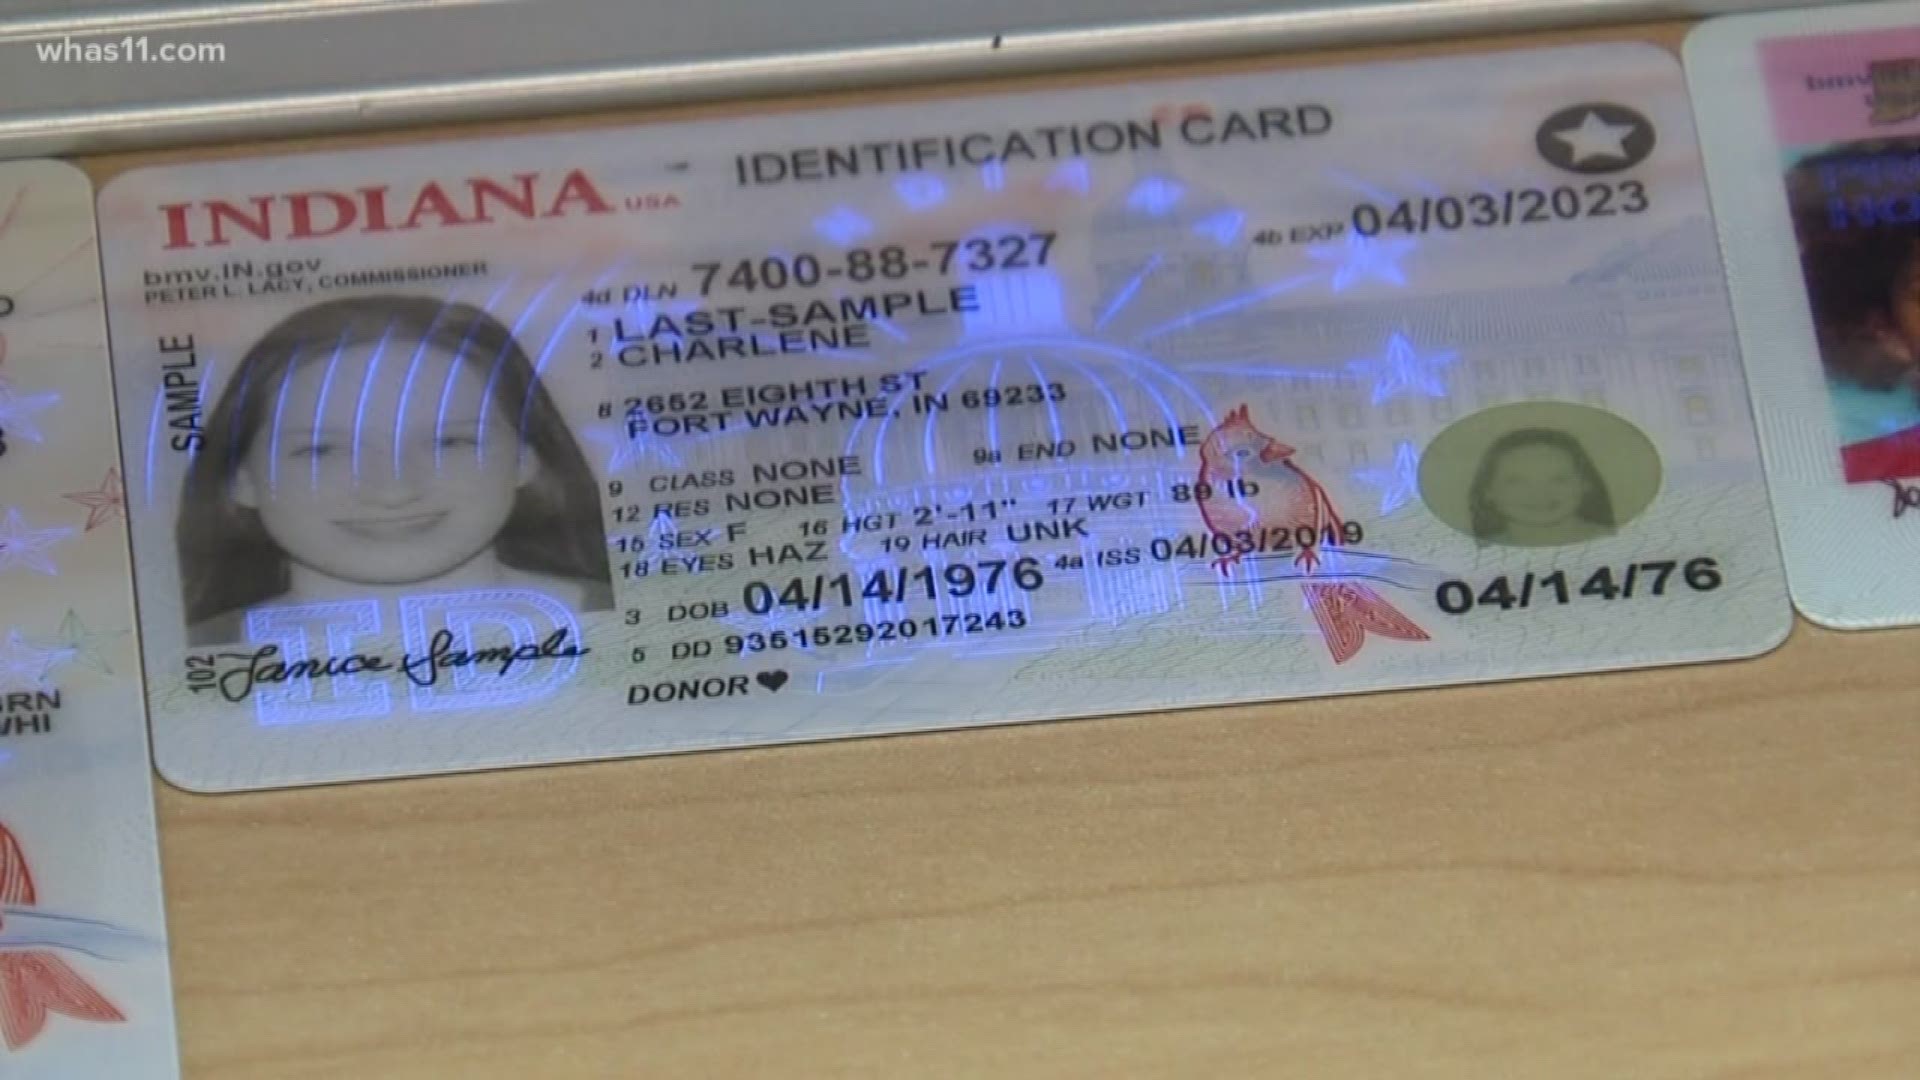 Officials with the Indiana BMV are debuting a new secure, user-friendly license design